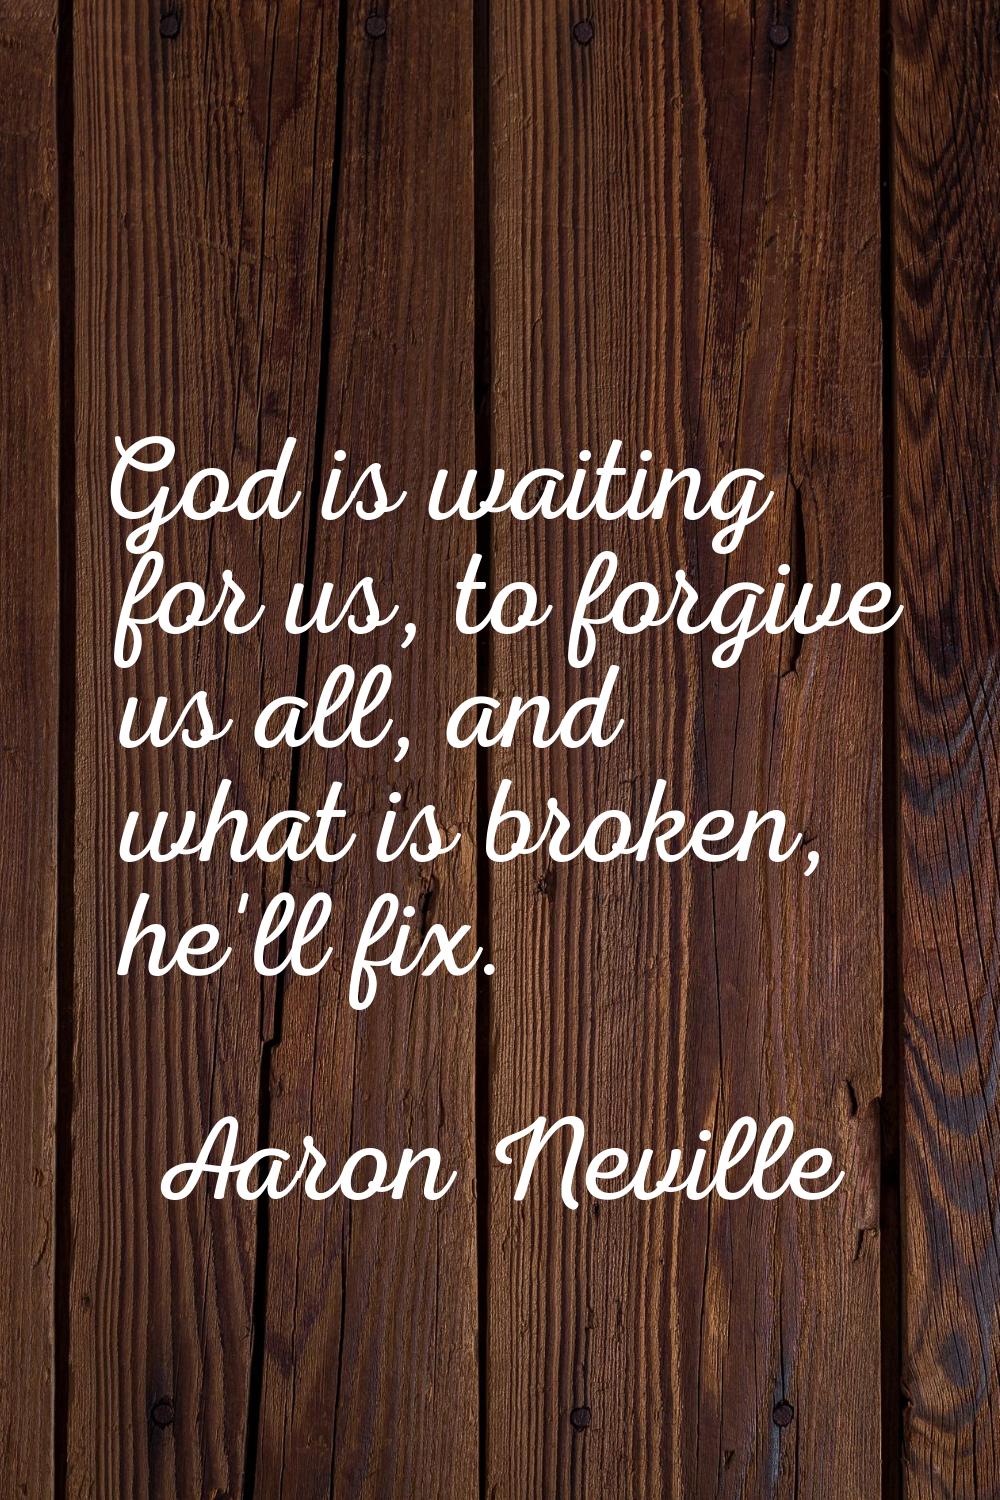 God is waiting for us, to forgive us all, and what is broken, he'll fix.